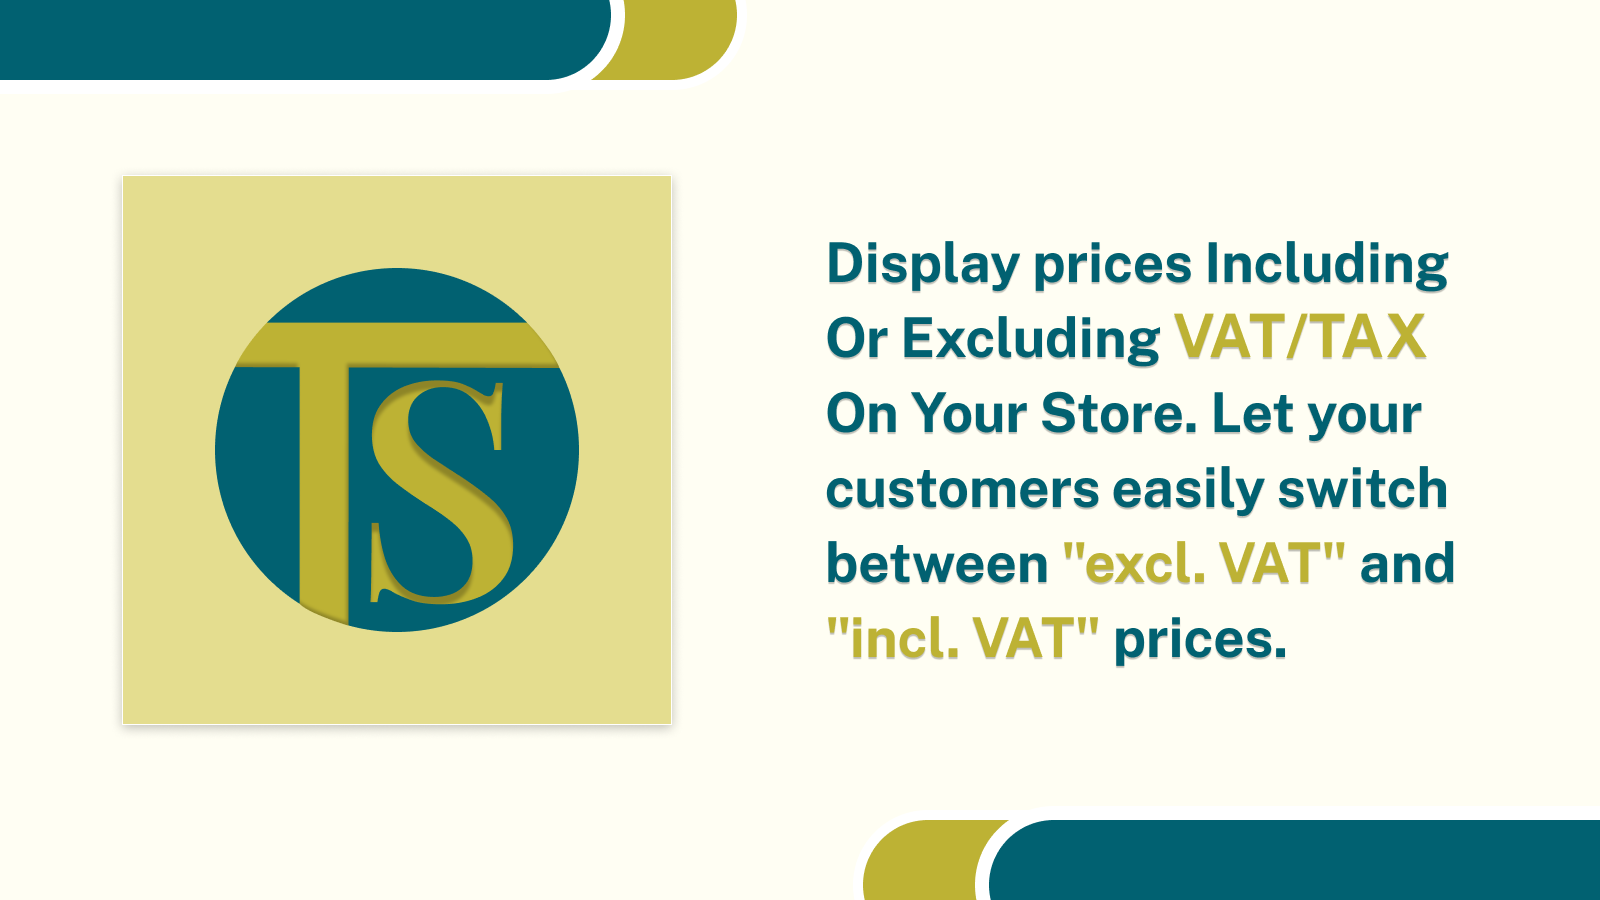 Display prices including or excluding VAT/TAX